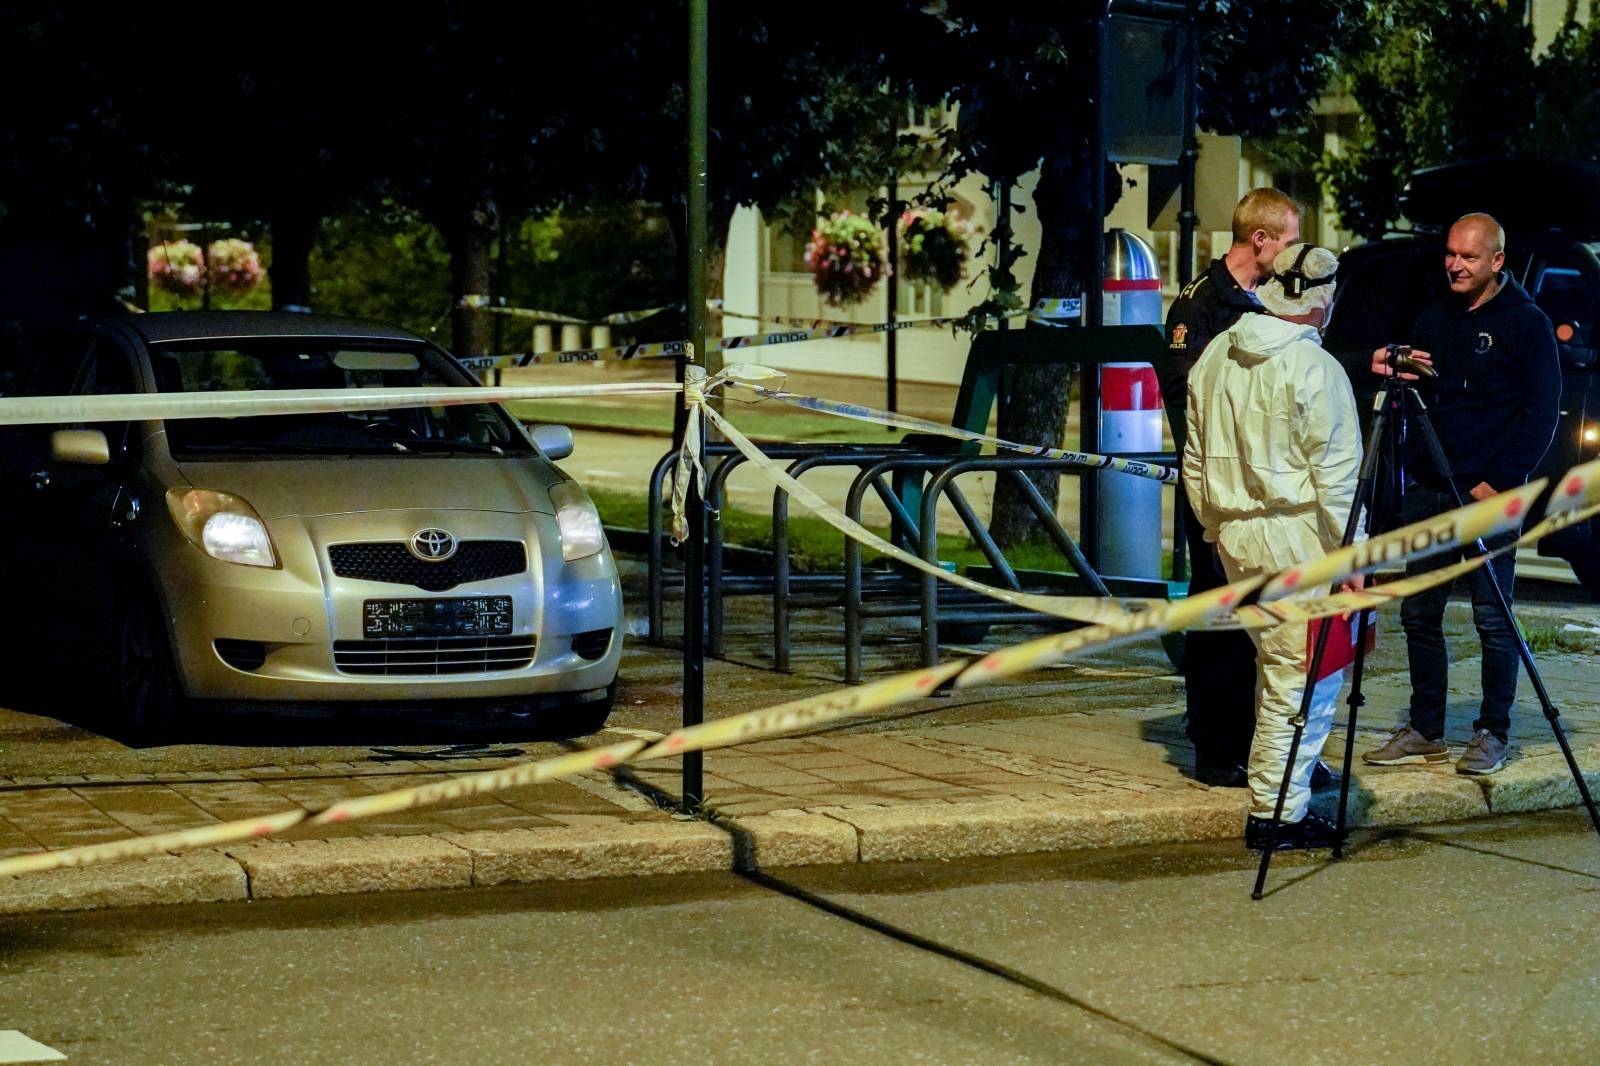 Police tape and police officers are seen near a vehicle after multiple stabbings in Sarpsborg